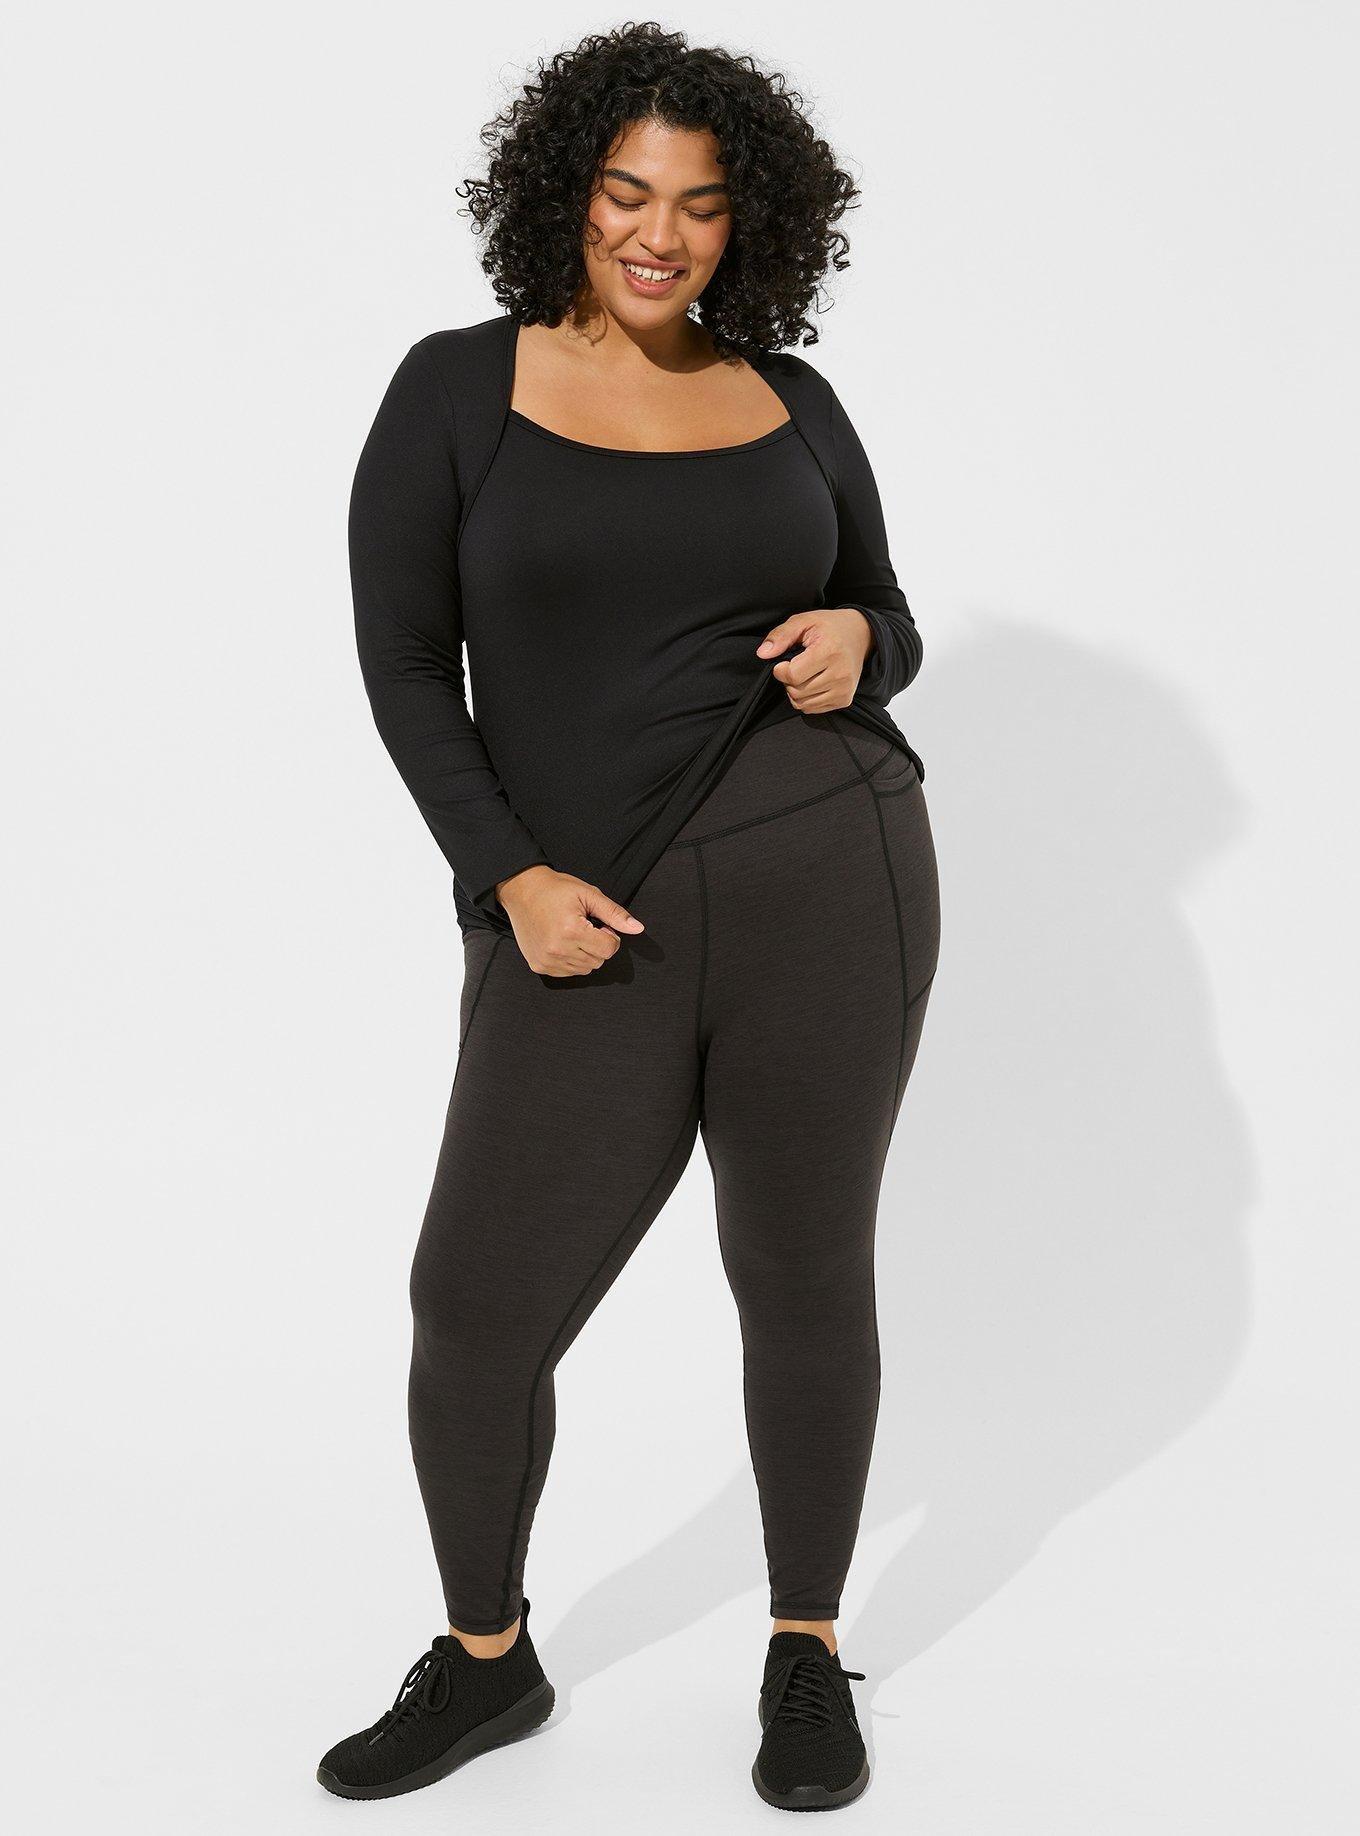 Even Leggings 'Snobs' Say These $14, 'Buttery Soft' Workout Tights